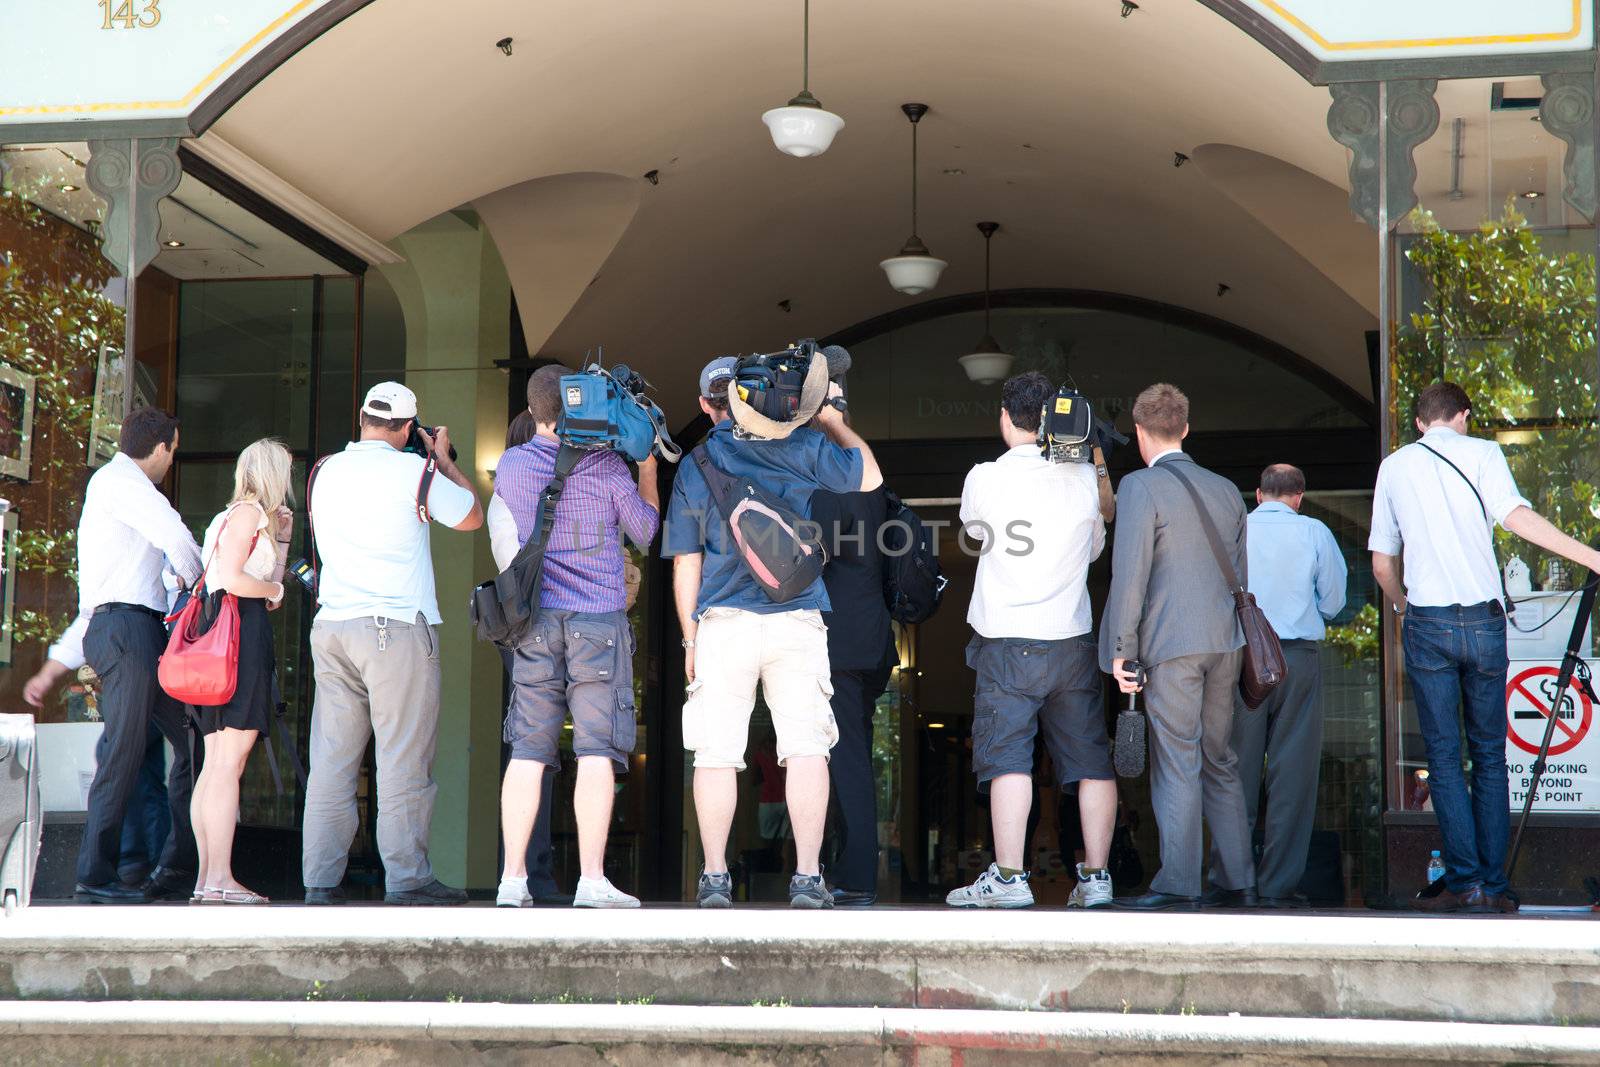 SYDNEY, AUSTRALIA - JANUARY 25: The press gather outside court waiting for subject of hearing to emerge on January 25 2011. High profile court cases create much press interest.